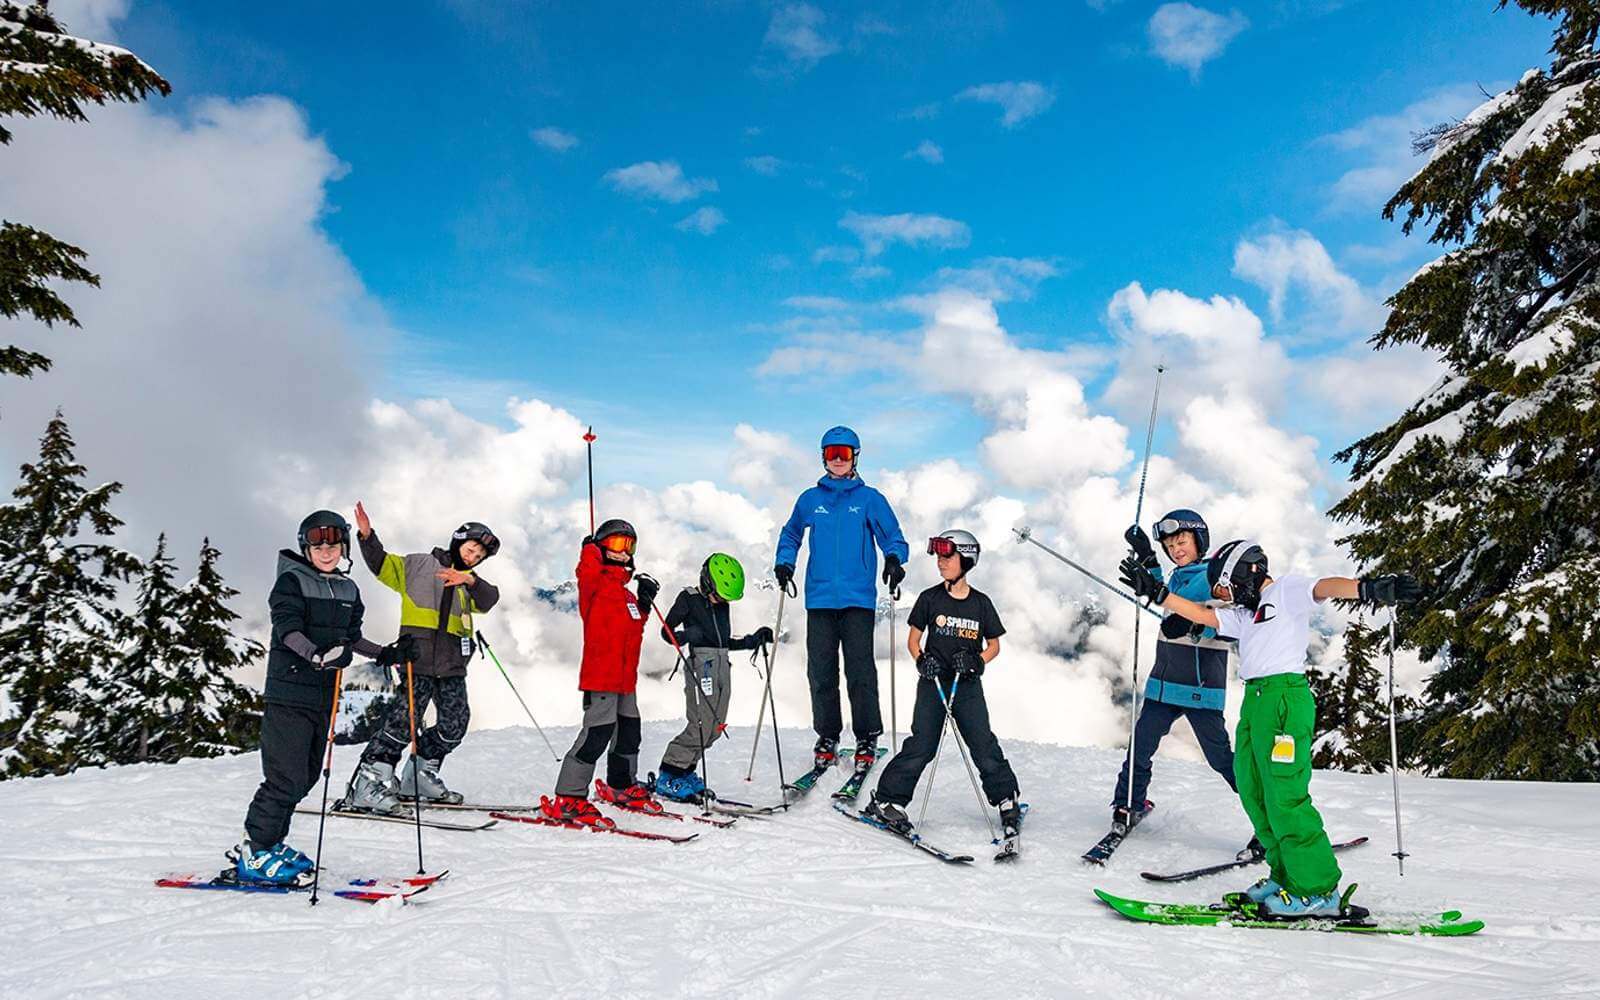 young skiers and a ski instructor at mount seymour in vancouver bc canada